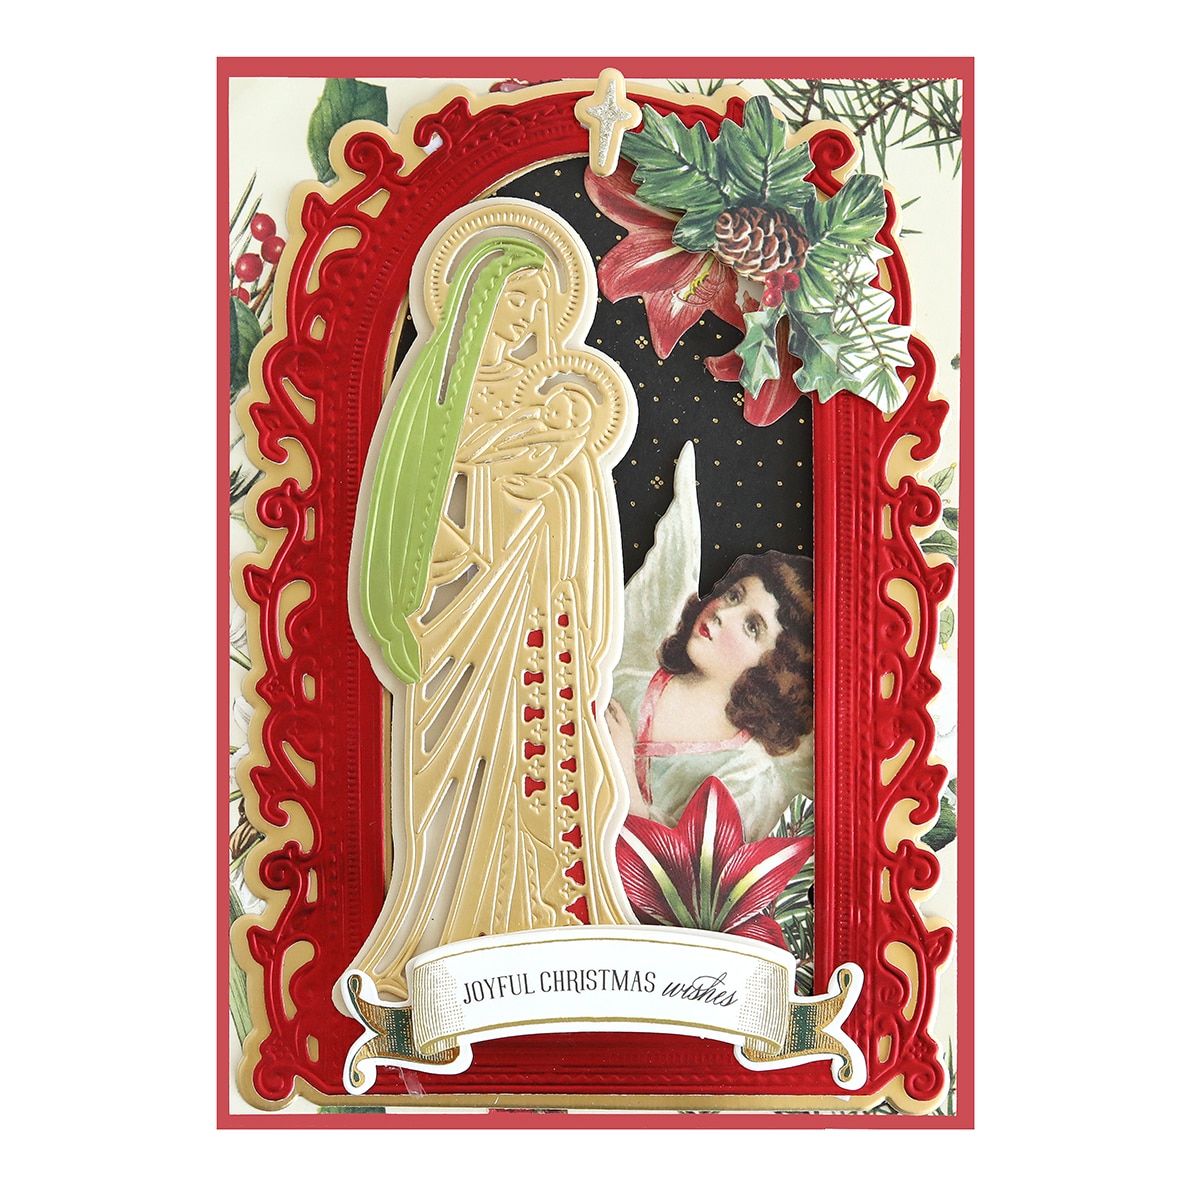 A christmas card with an image of the virgin mary.